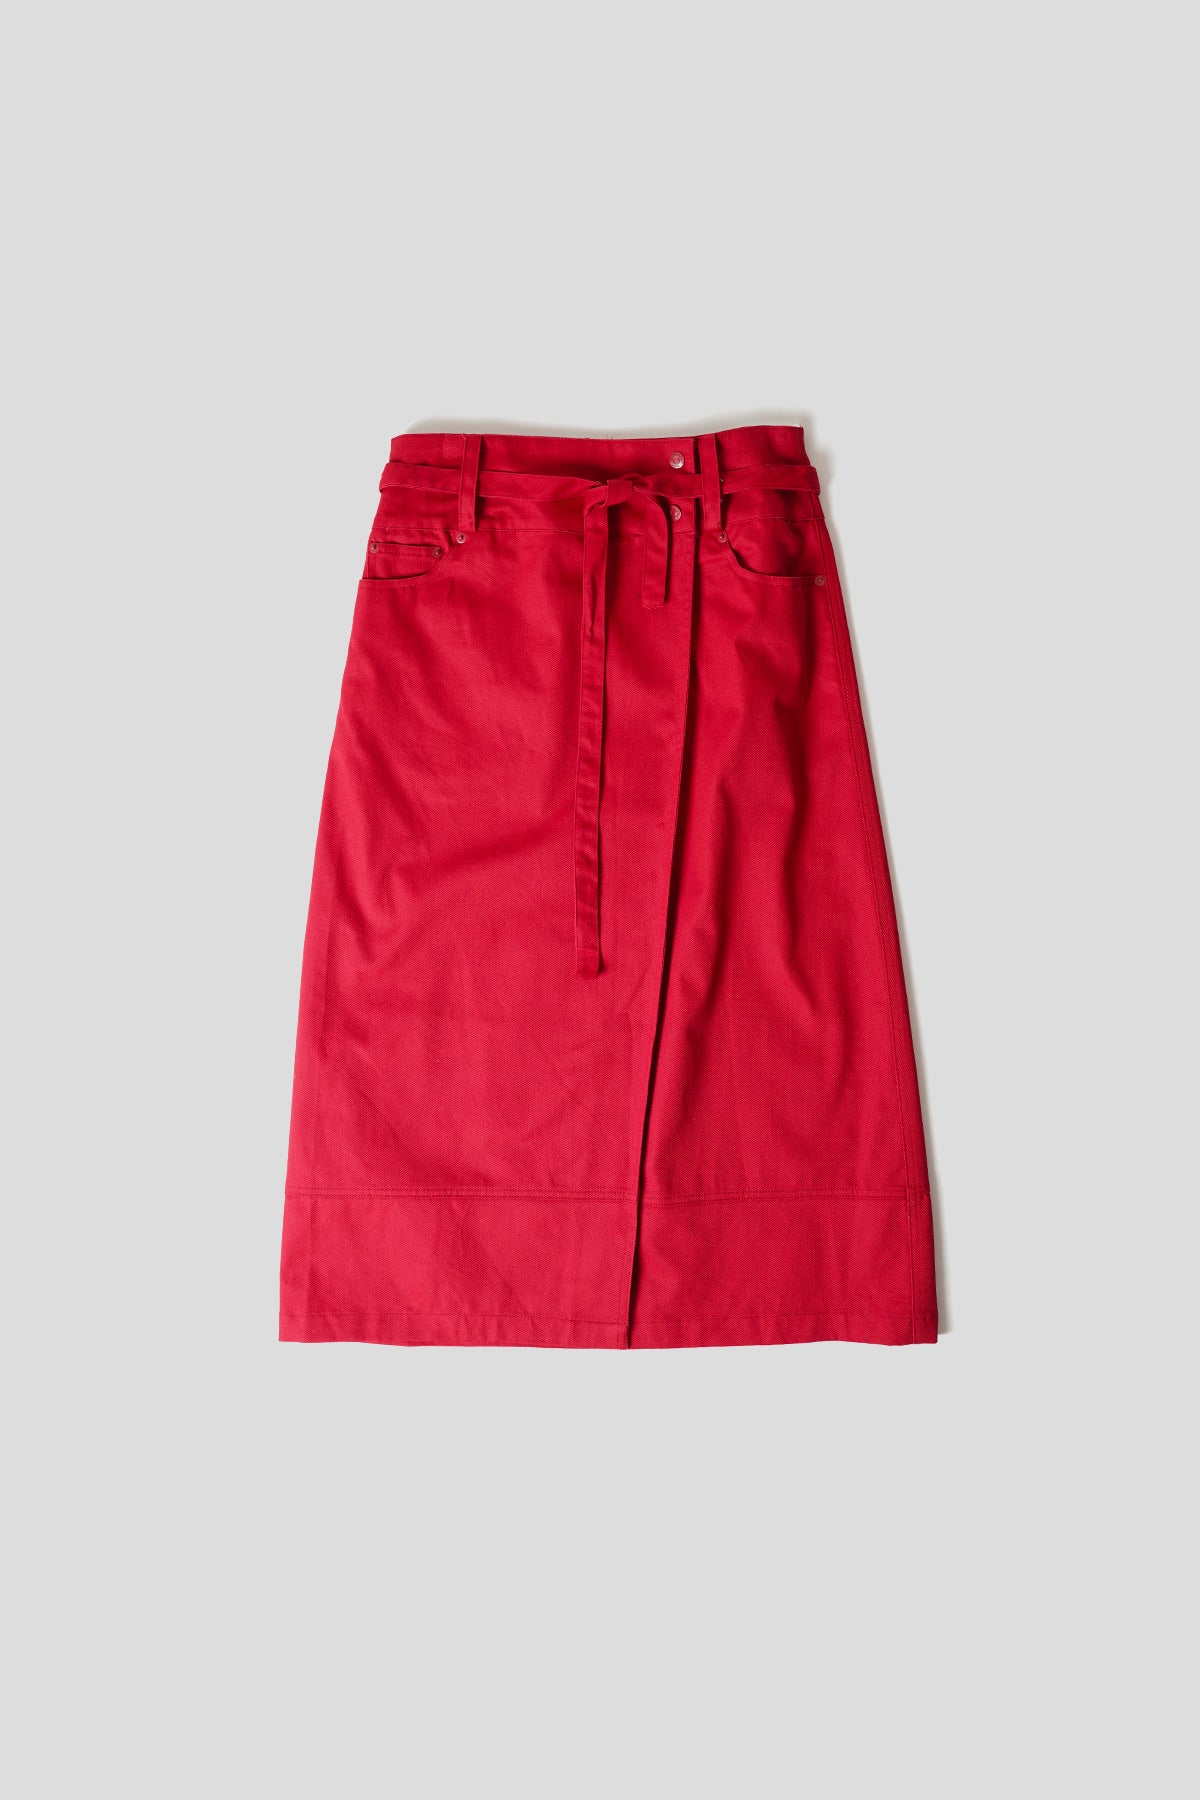 house of sunny - LOW RIDER WRAP SKIRT RED - LE LABO STORE